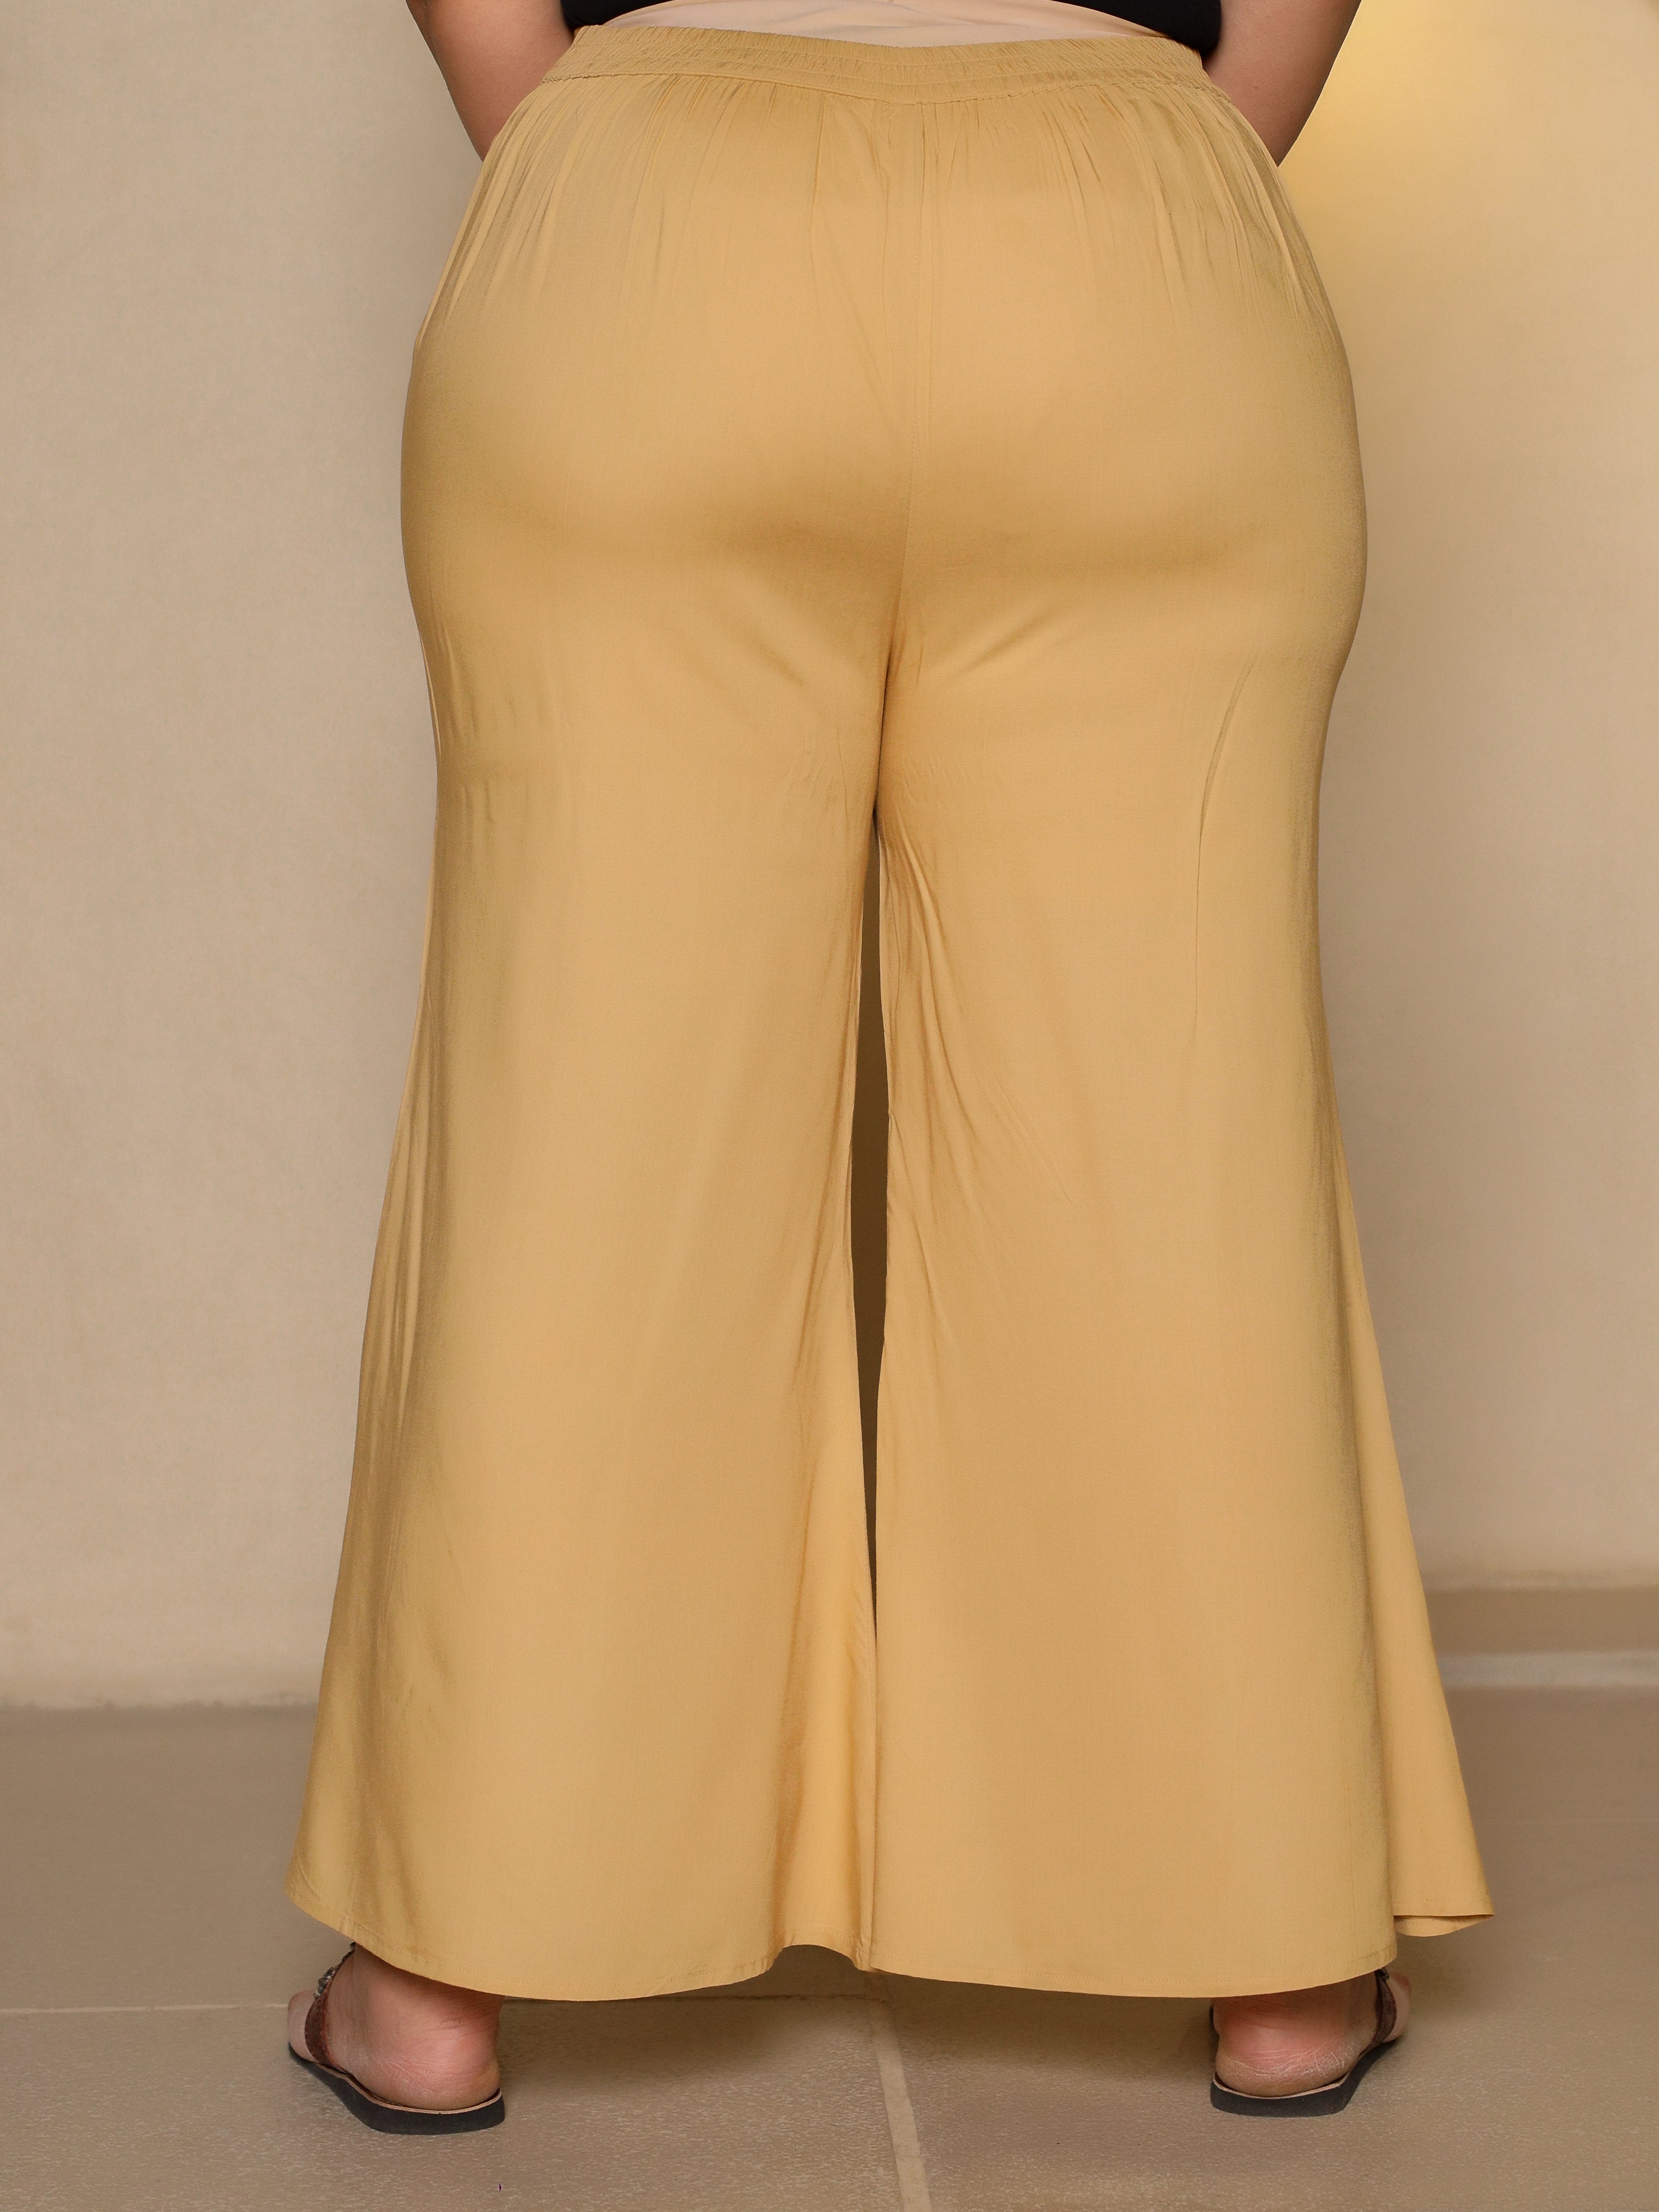 Juniper Beige Modal Rayon Women Partially Elasticated Plus Size Bell Bottom Pants With Single Side Pocket